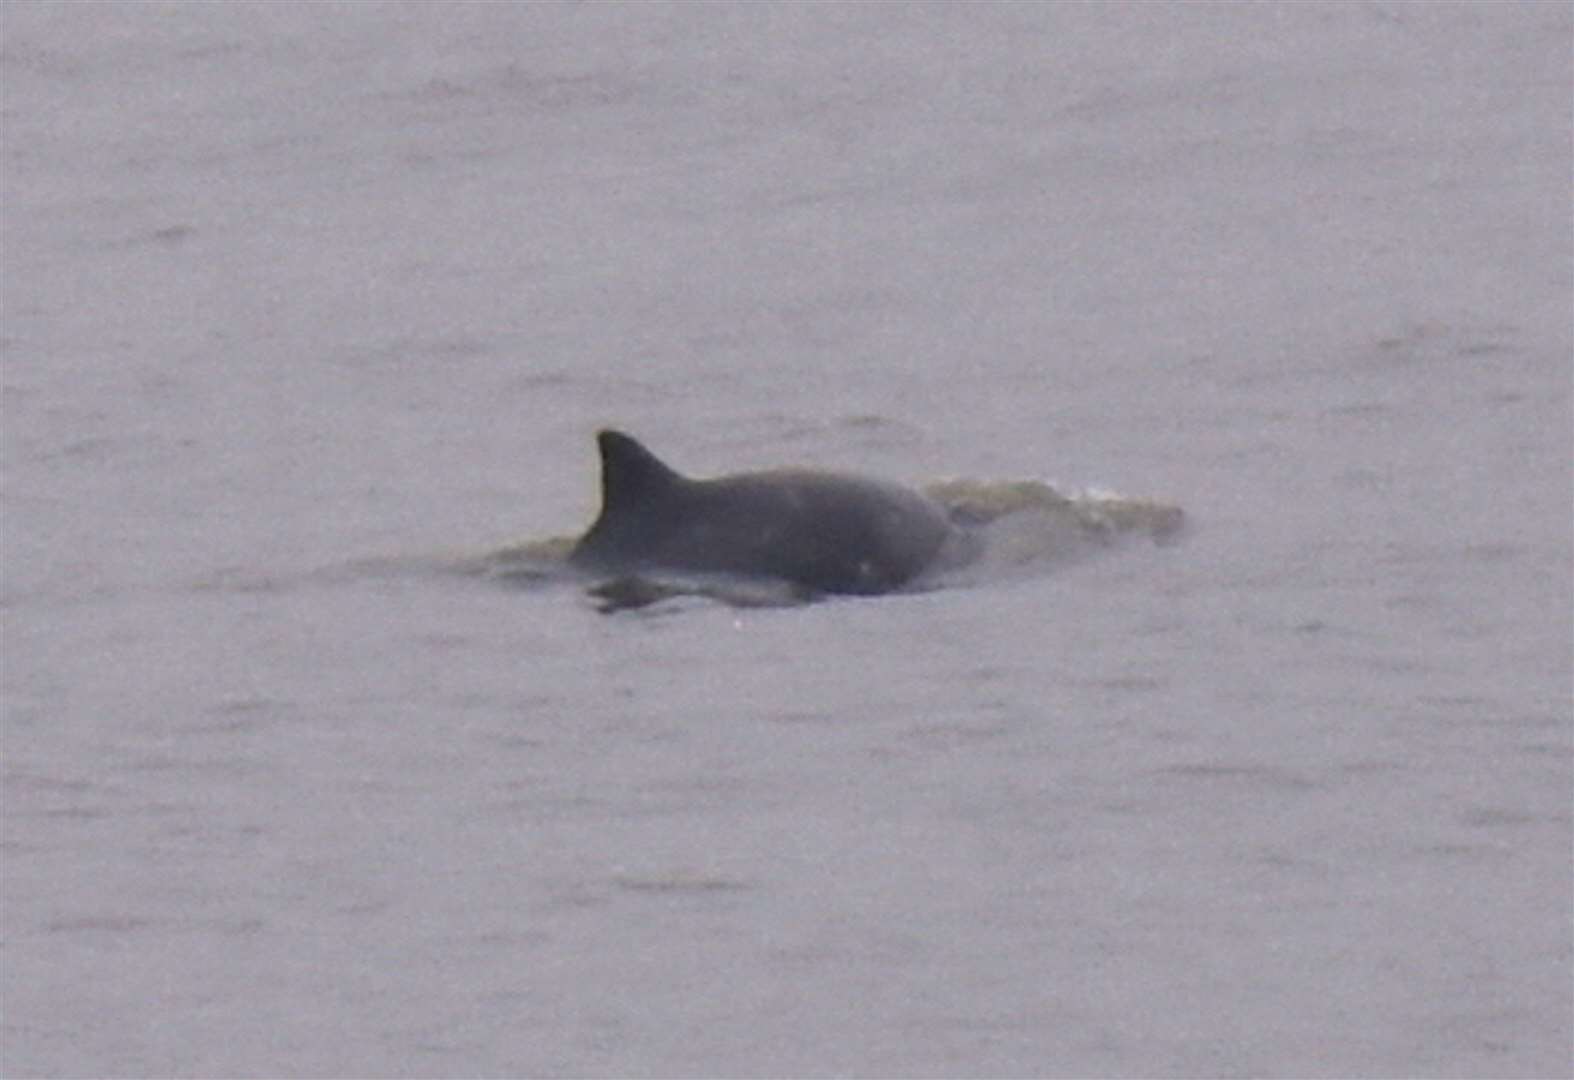 A harbour porpoise was spotted swimming in the Thames near Gravesend Town Pier. Photo: Fraser Gray.